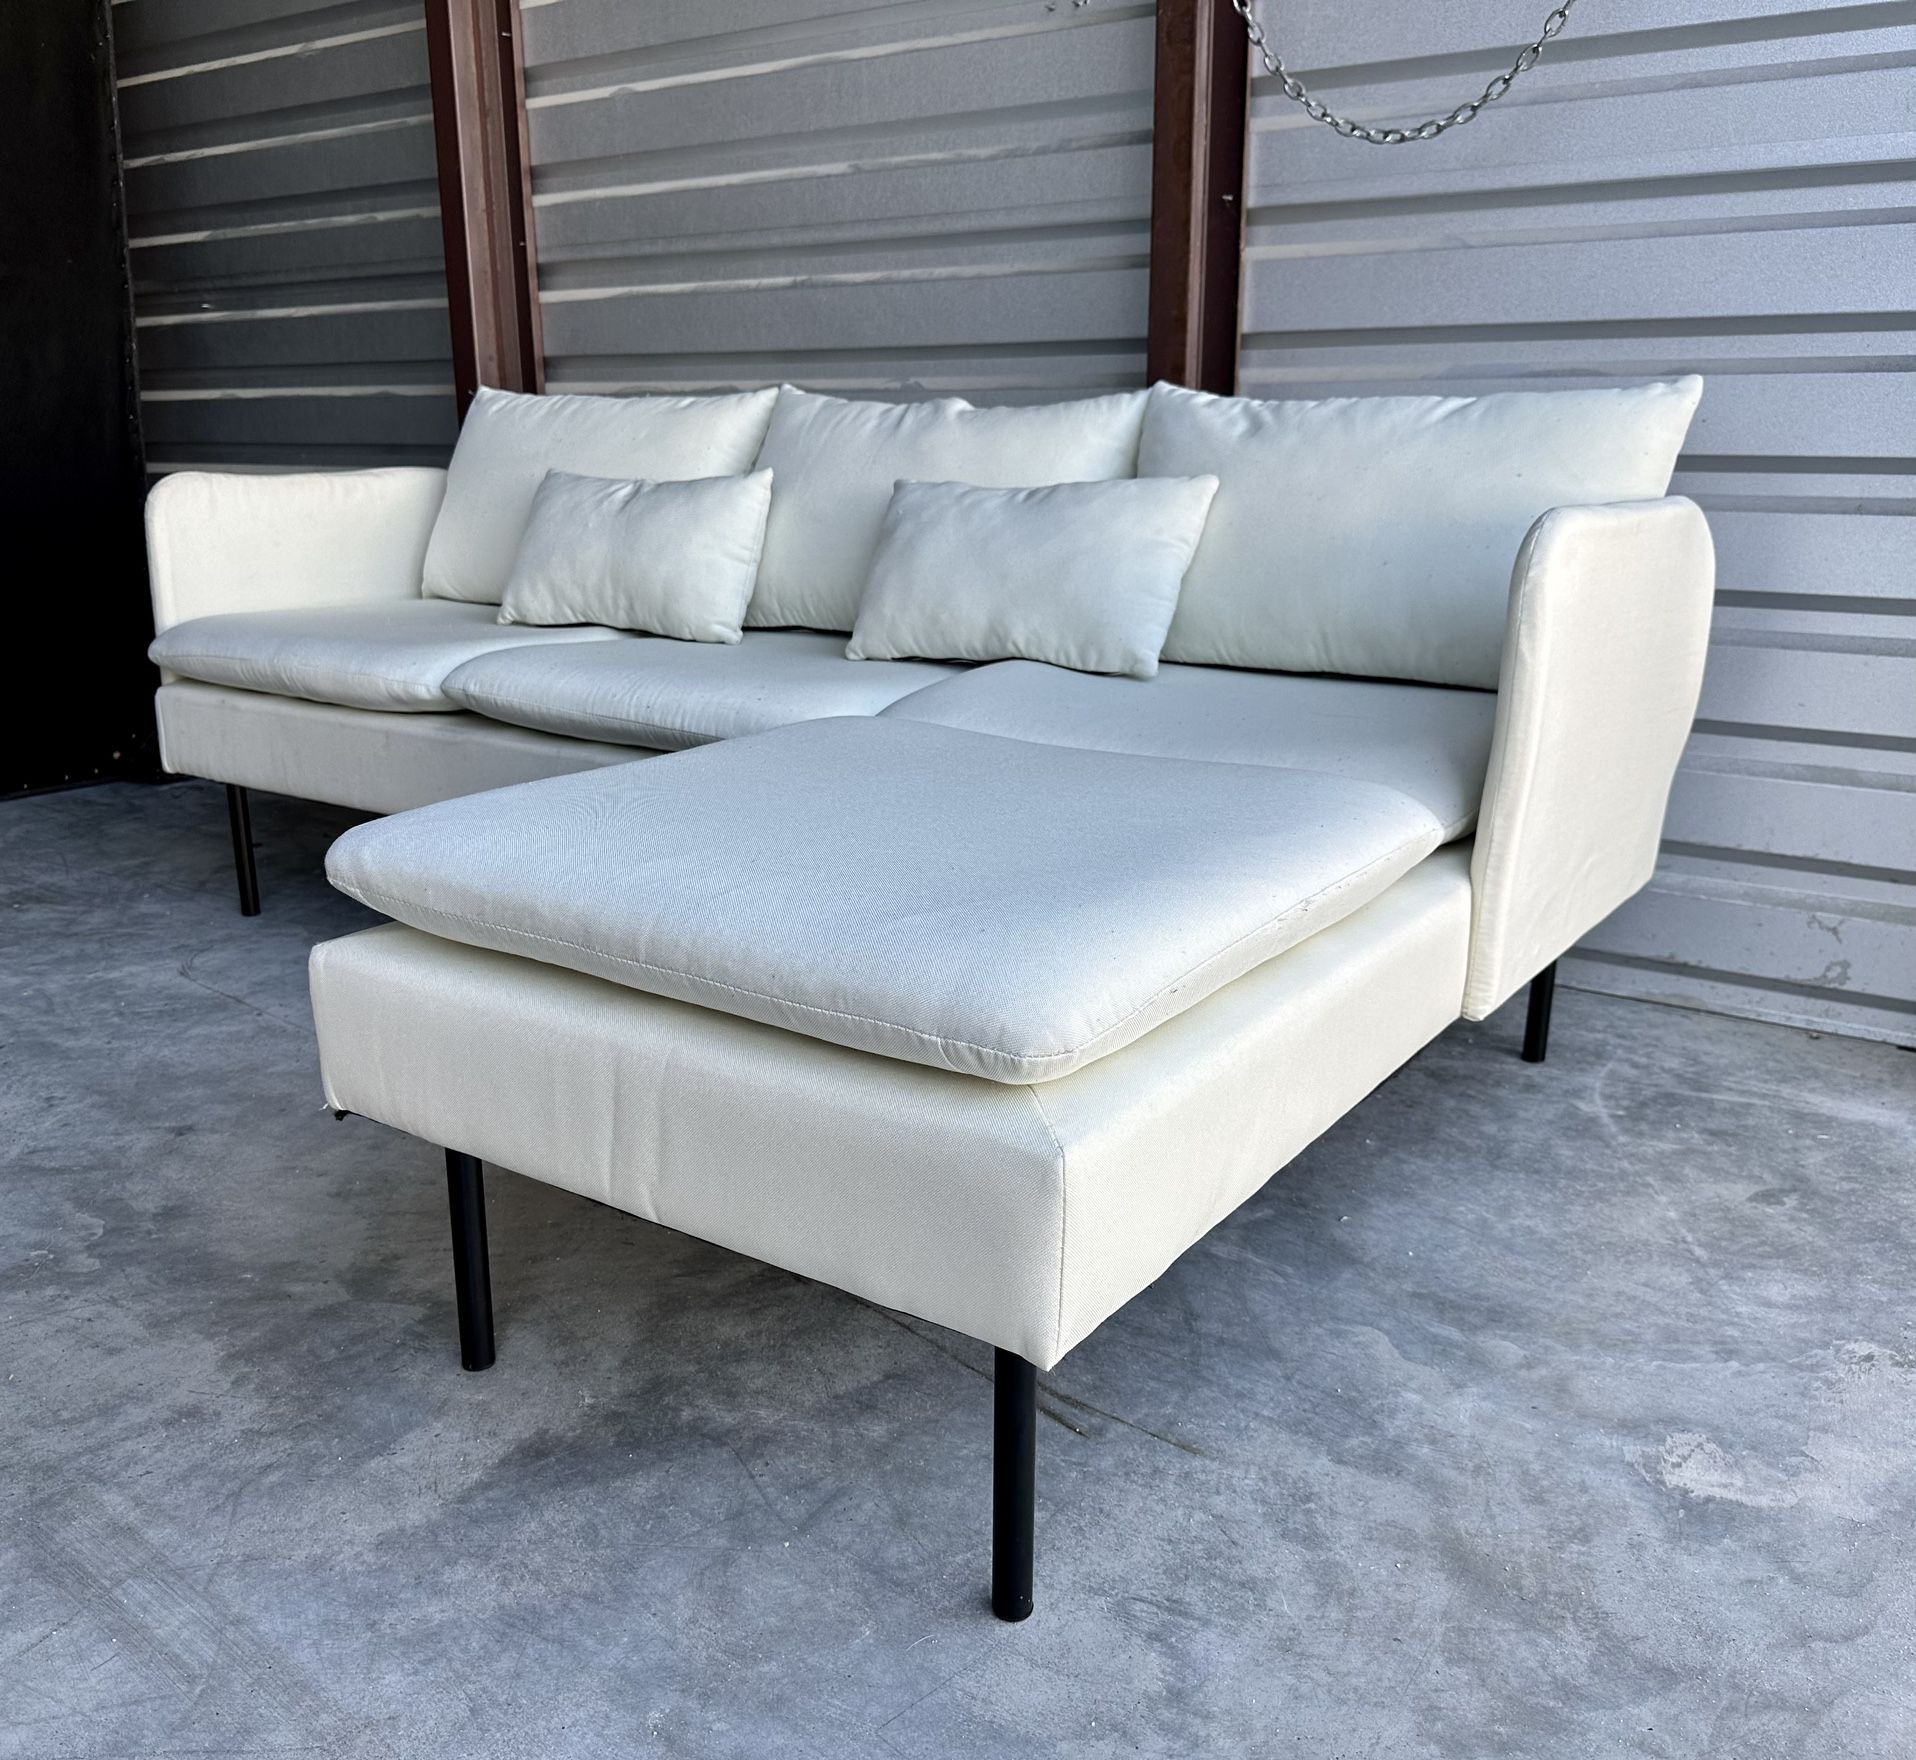 Small Beige Sectional - $250 obo